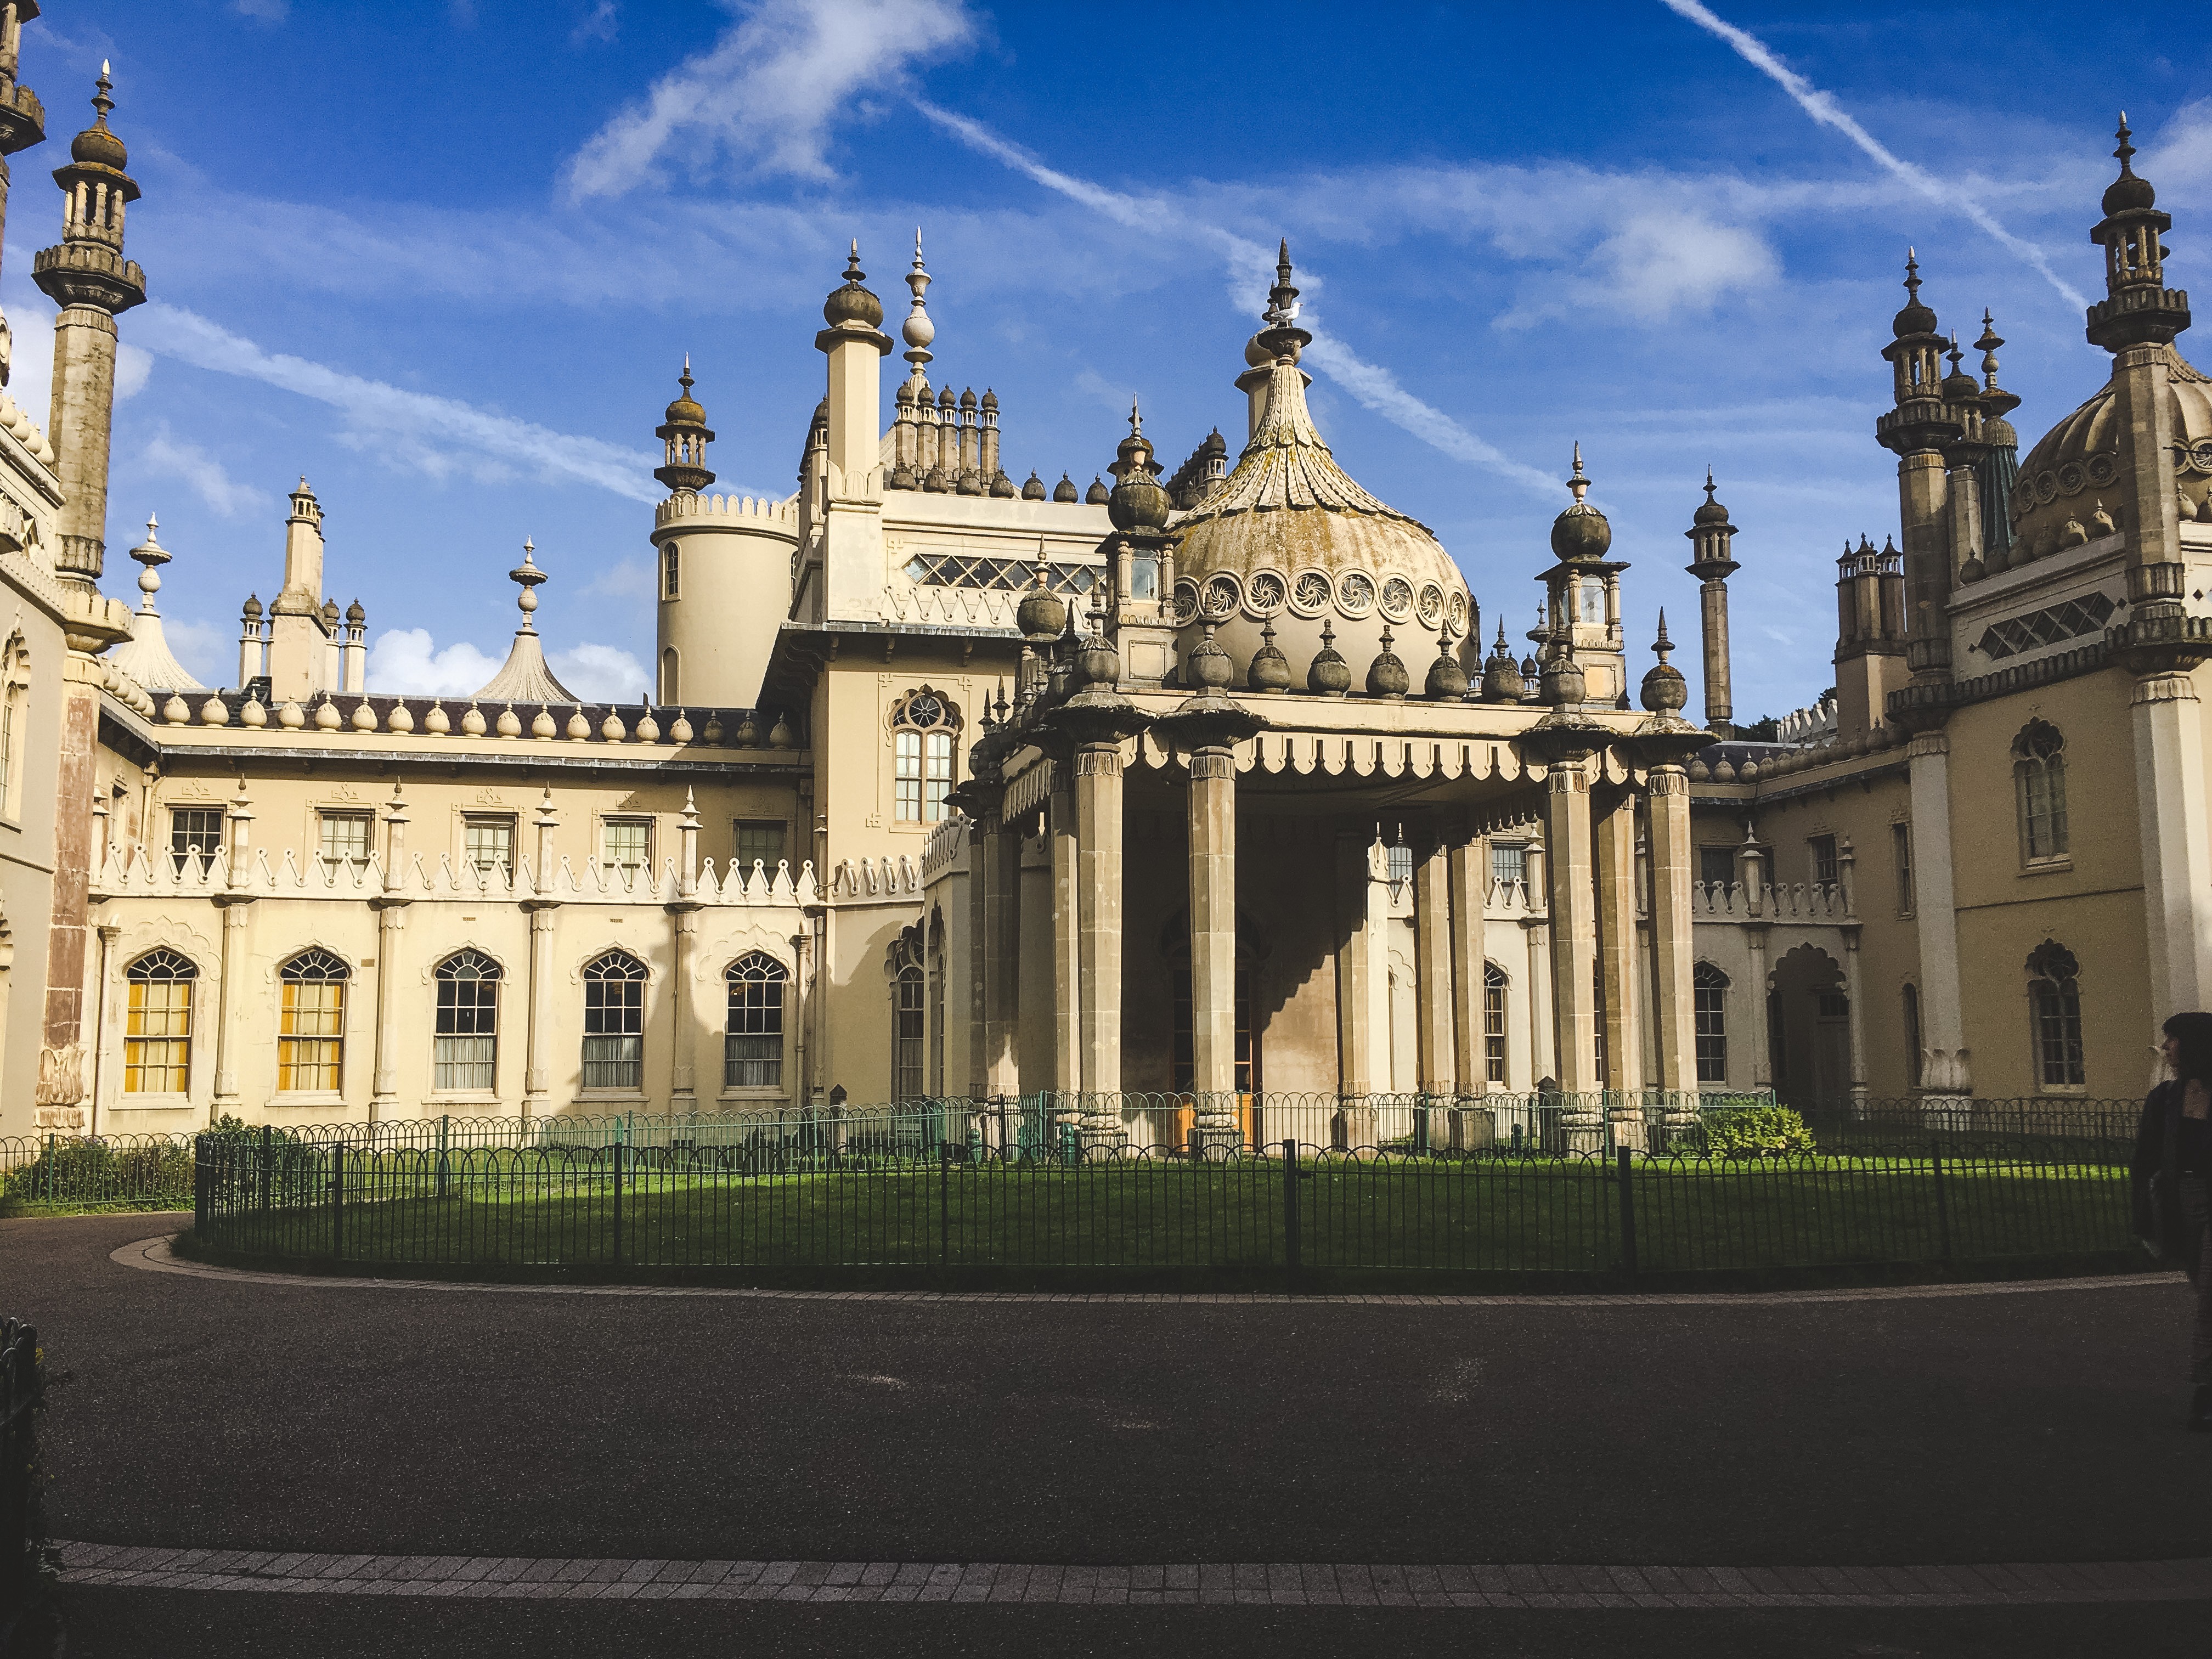 The Royal Pavilion is unlike anything else in England